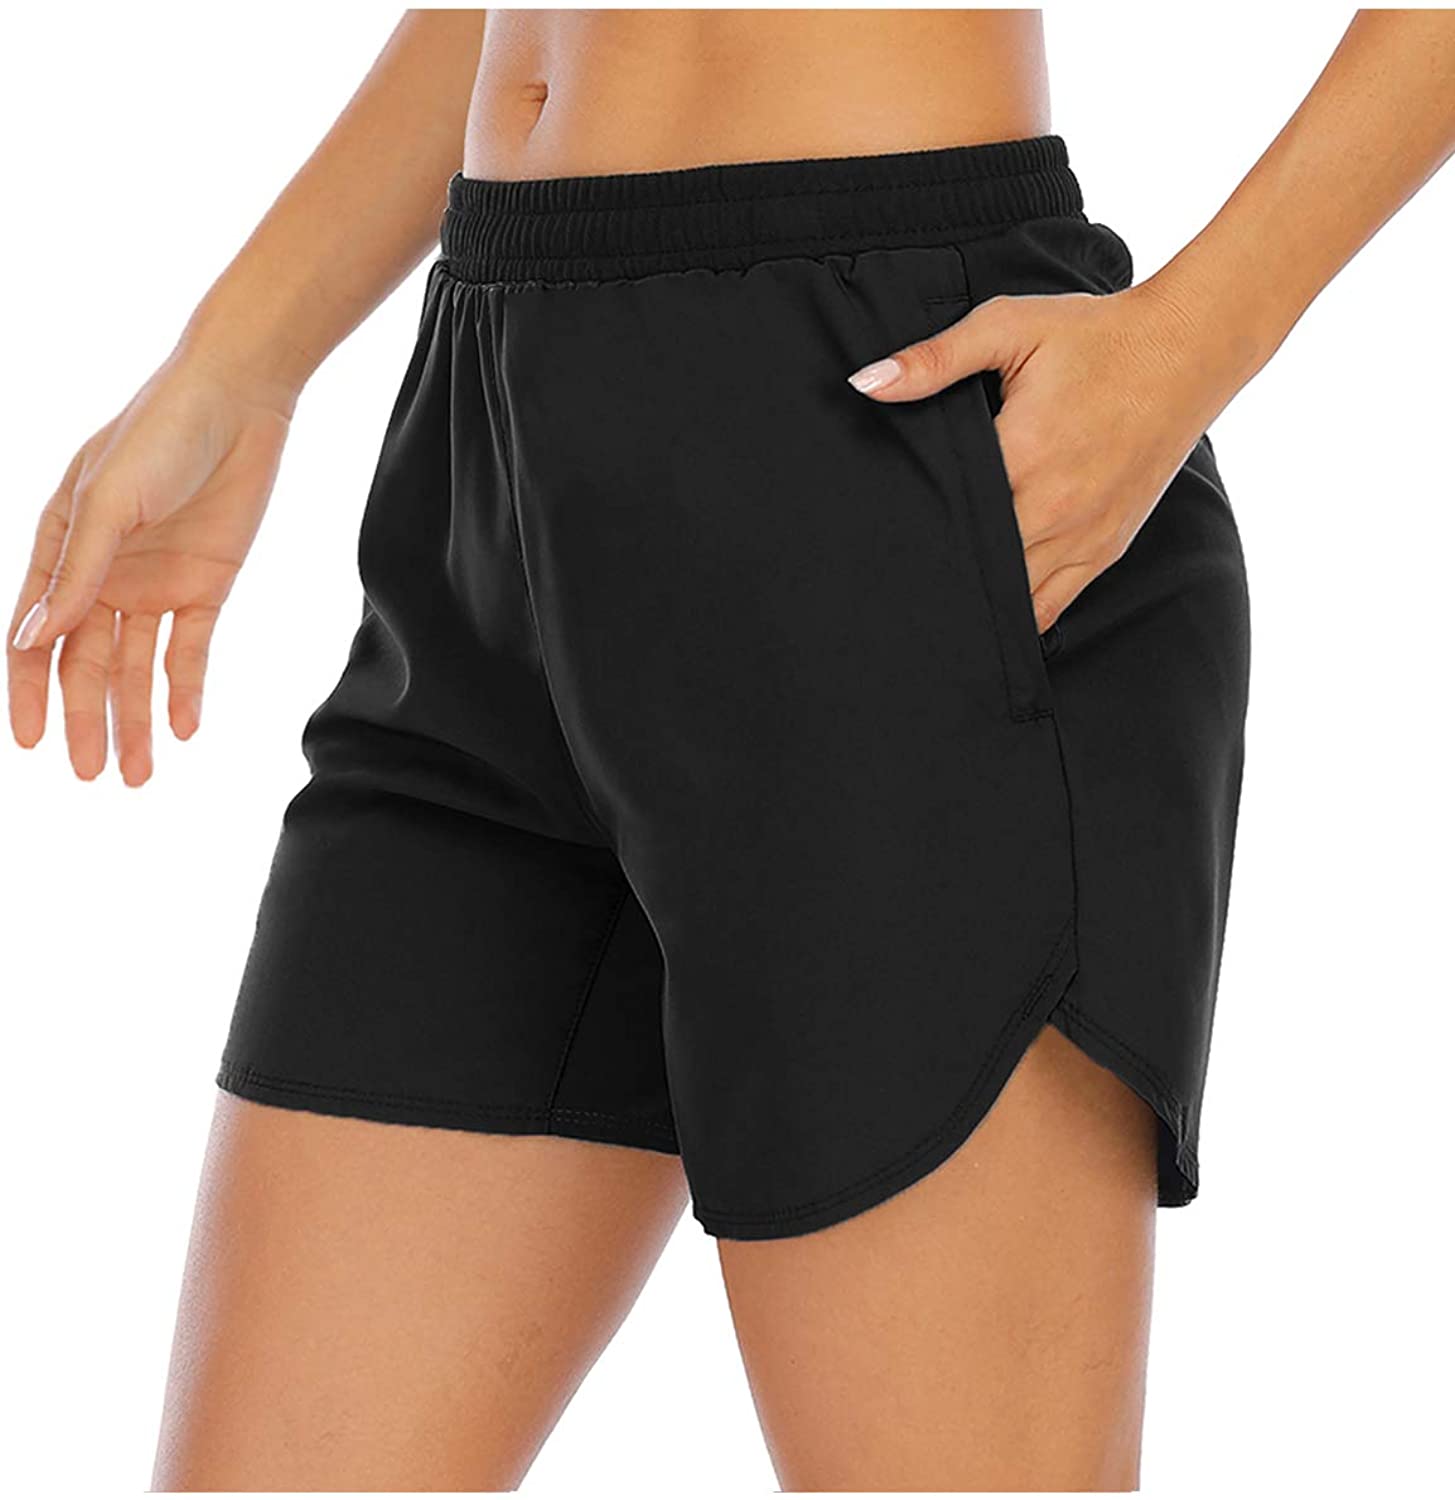 Running Shorts With Mesh Liner